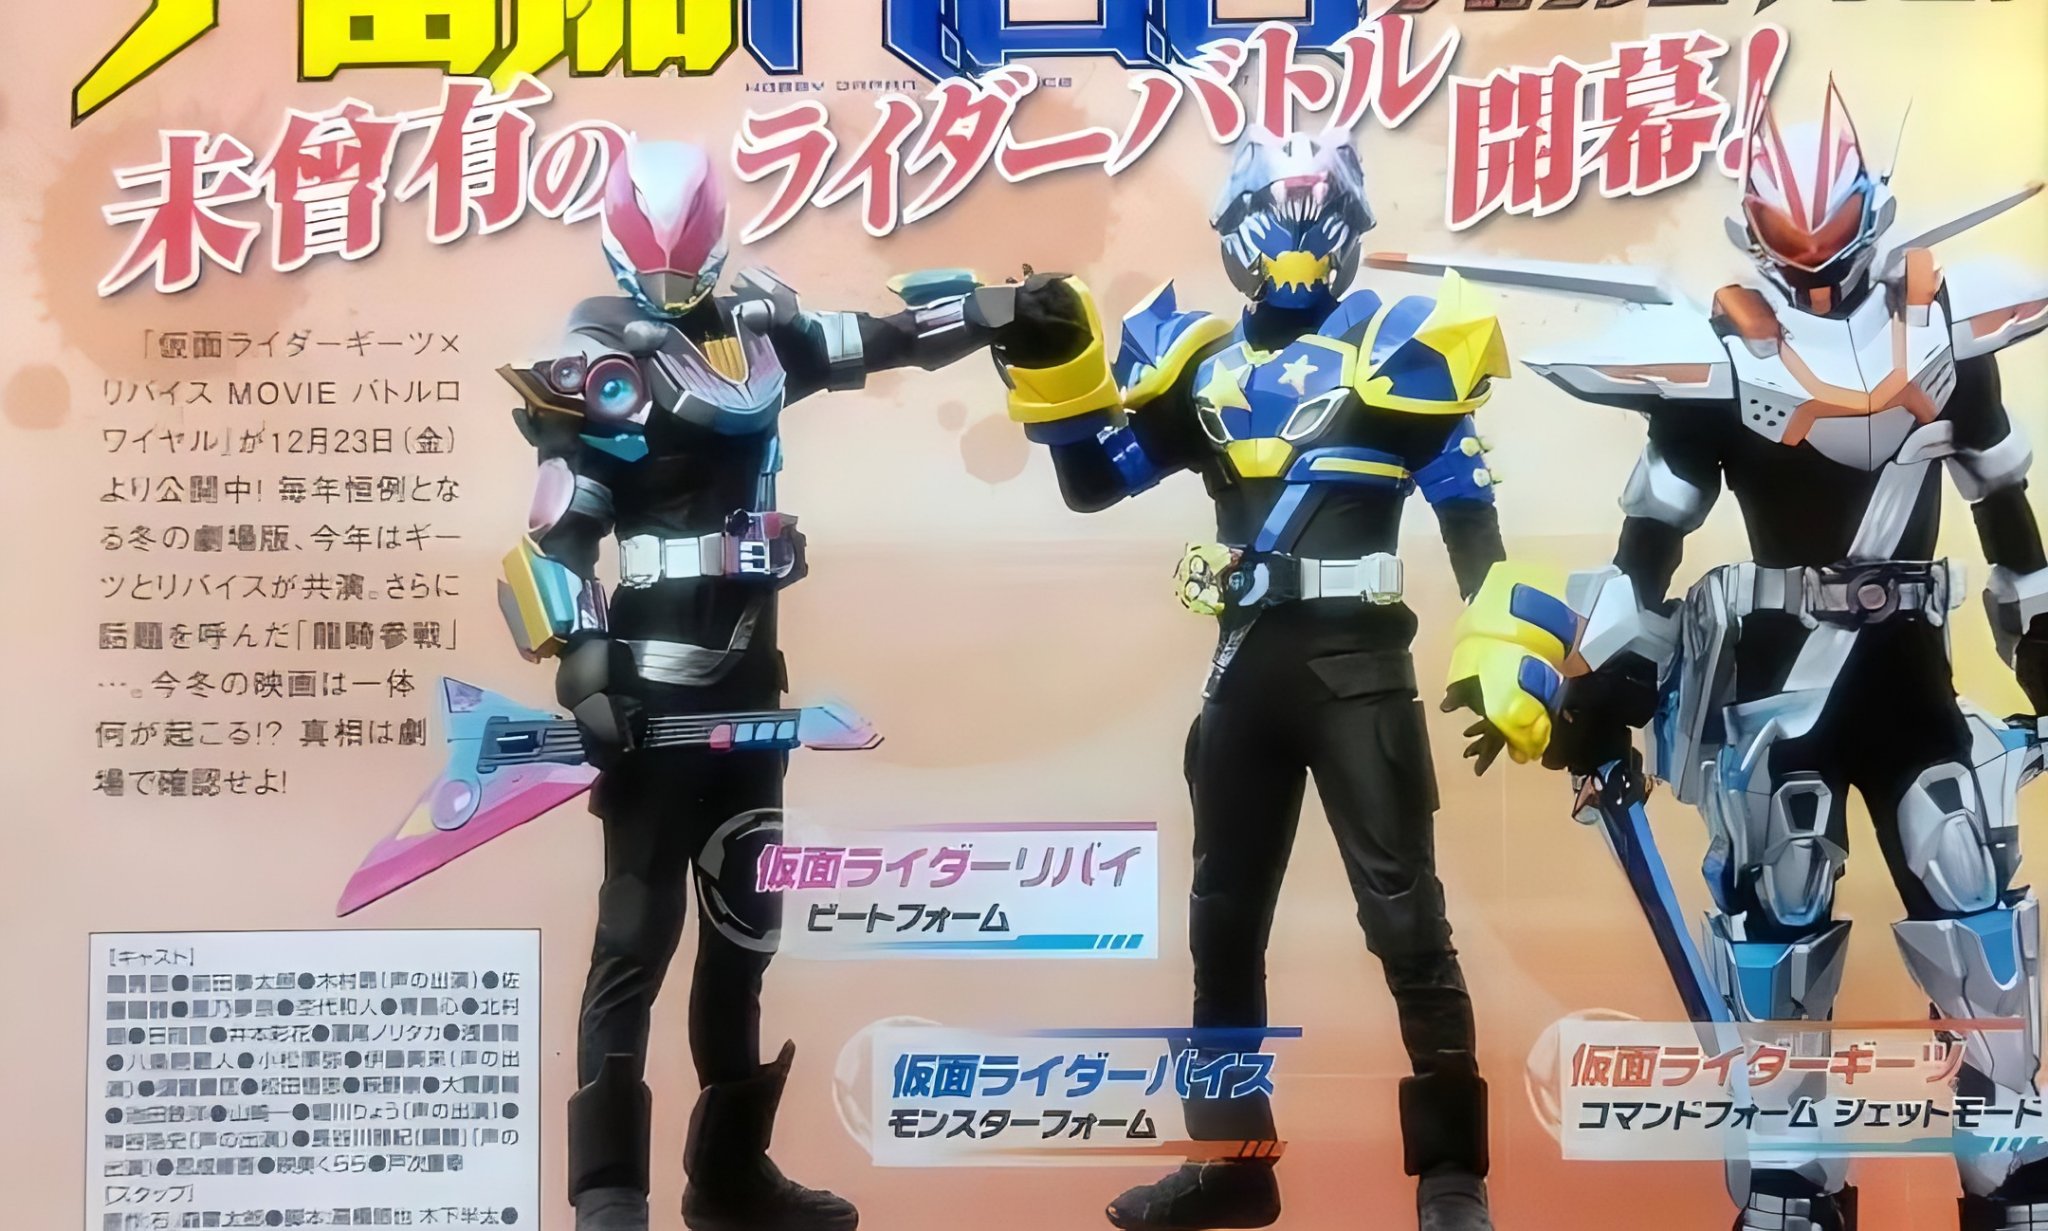 toku on X: "Revi Beat Form Vice Monster Form Geats